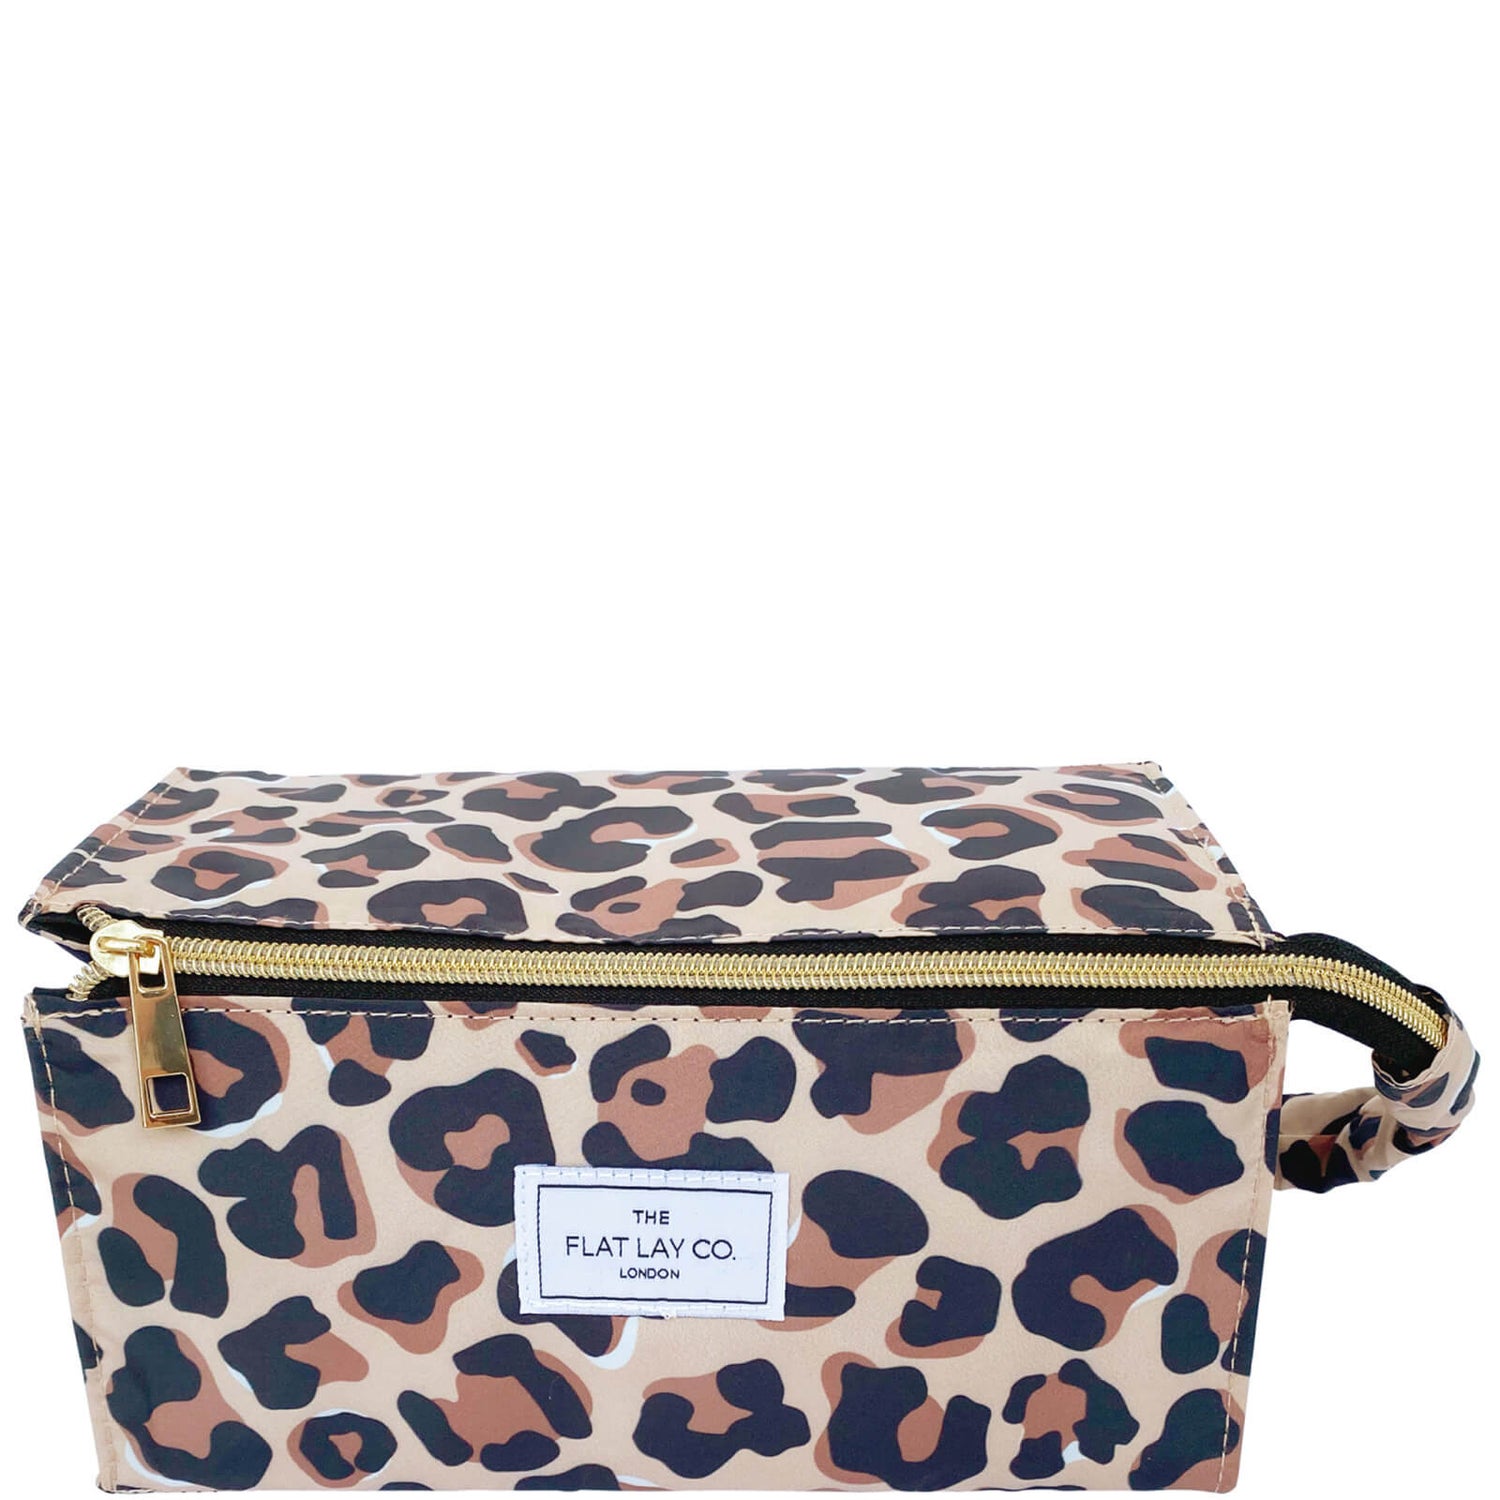 The Flat Lay Co. Open Flat Box Bag - Leopard Print - FREE Delivery